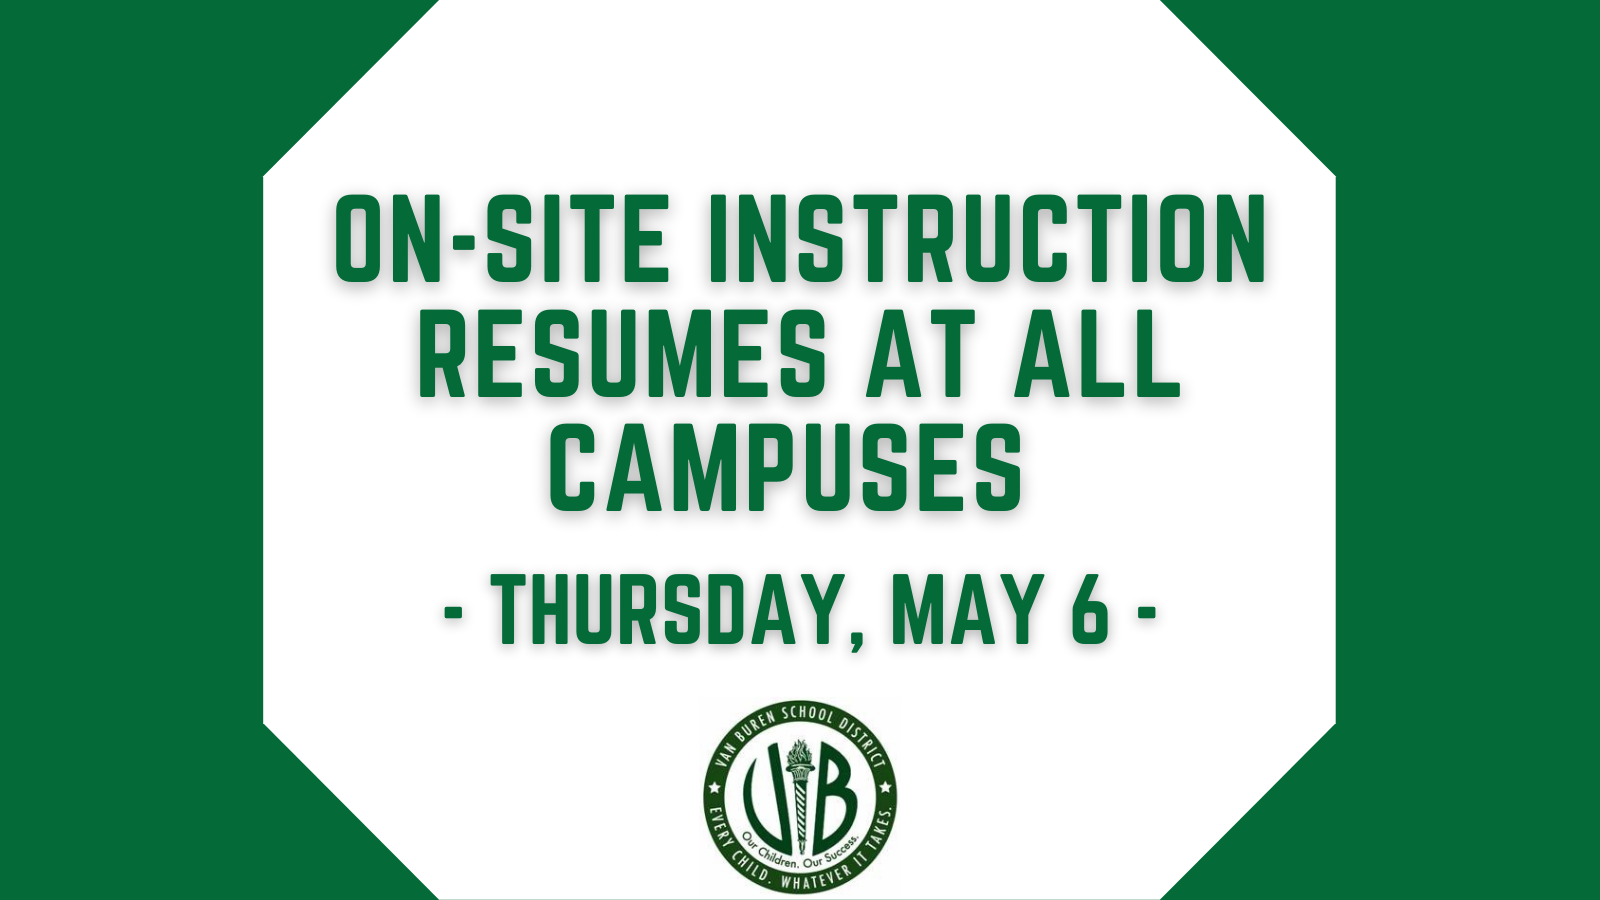 On-site Instruction to Resume at All Campuses Thursday